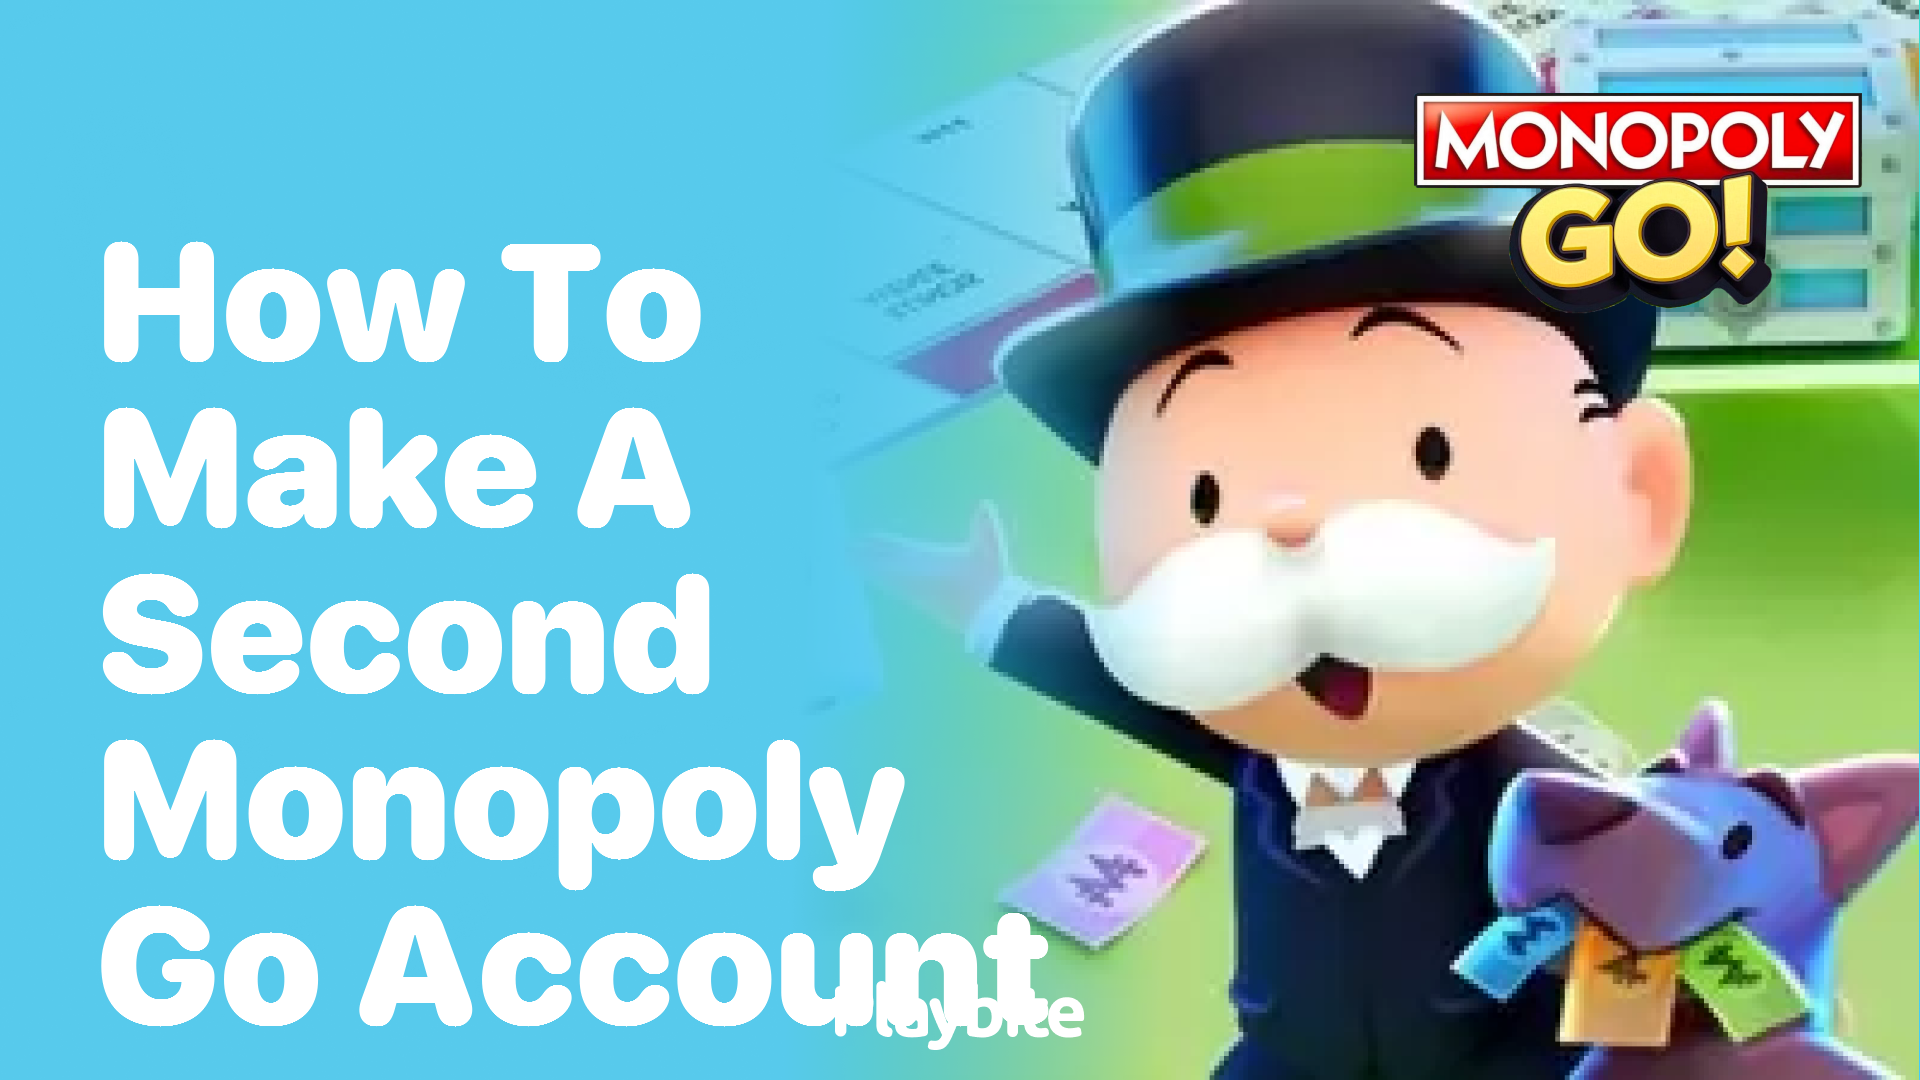 How to Make a Second Monopoly Go Account